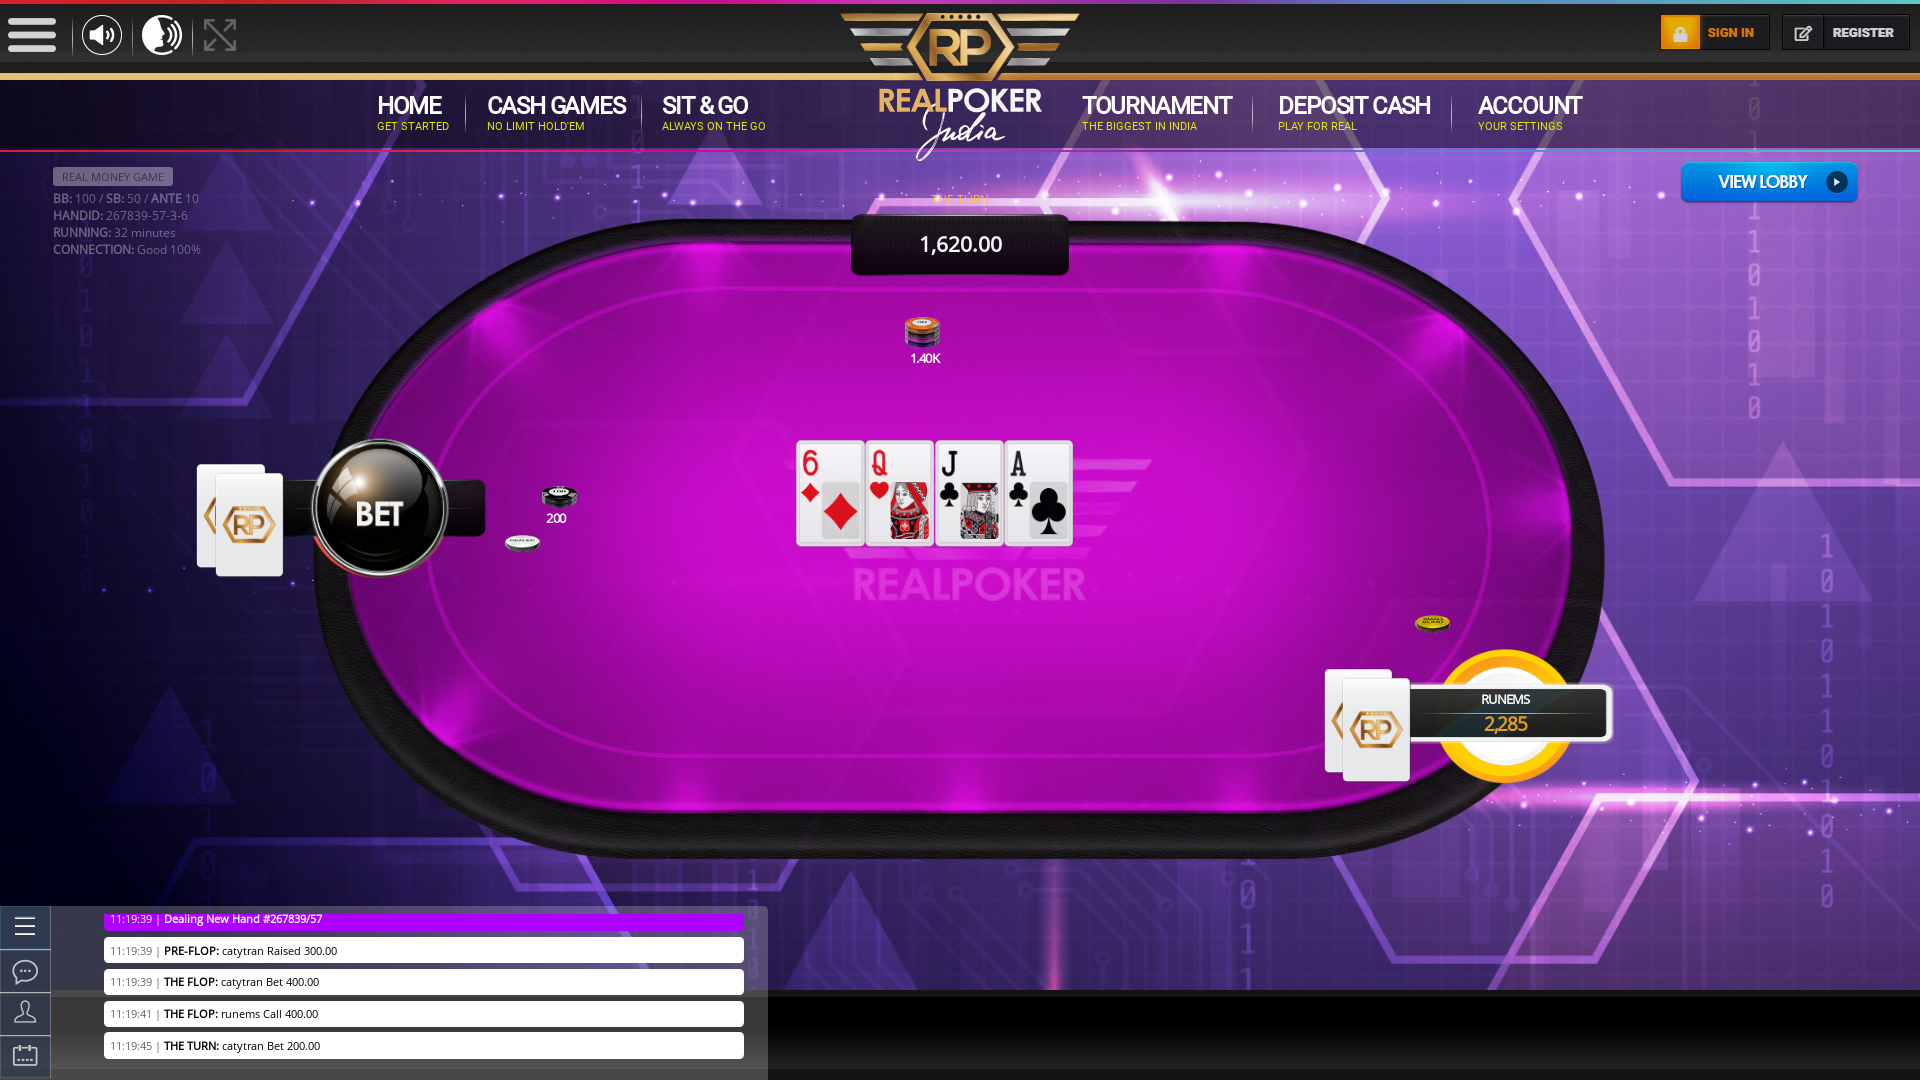 Real Indian poker on a 10 player table in the 32nd minute of the game